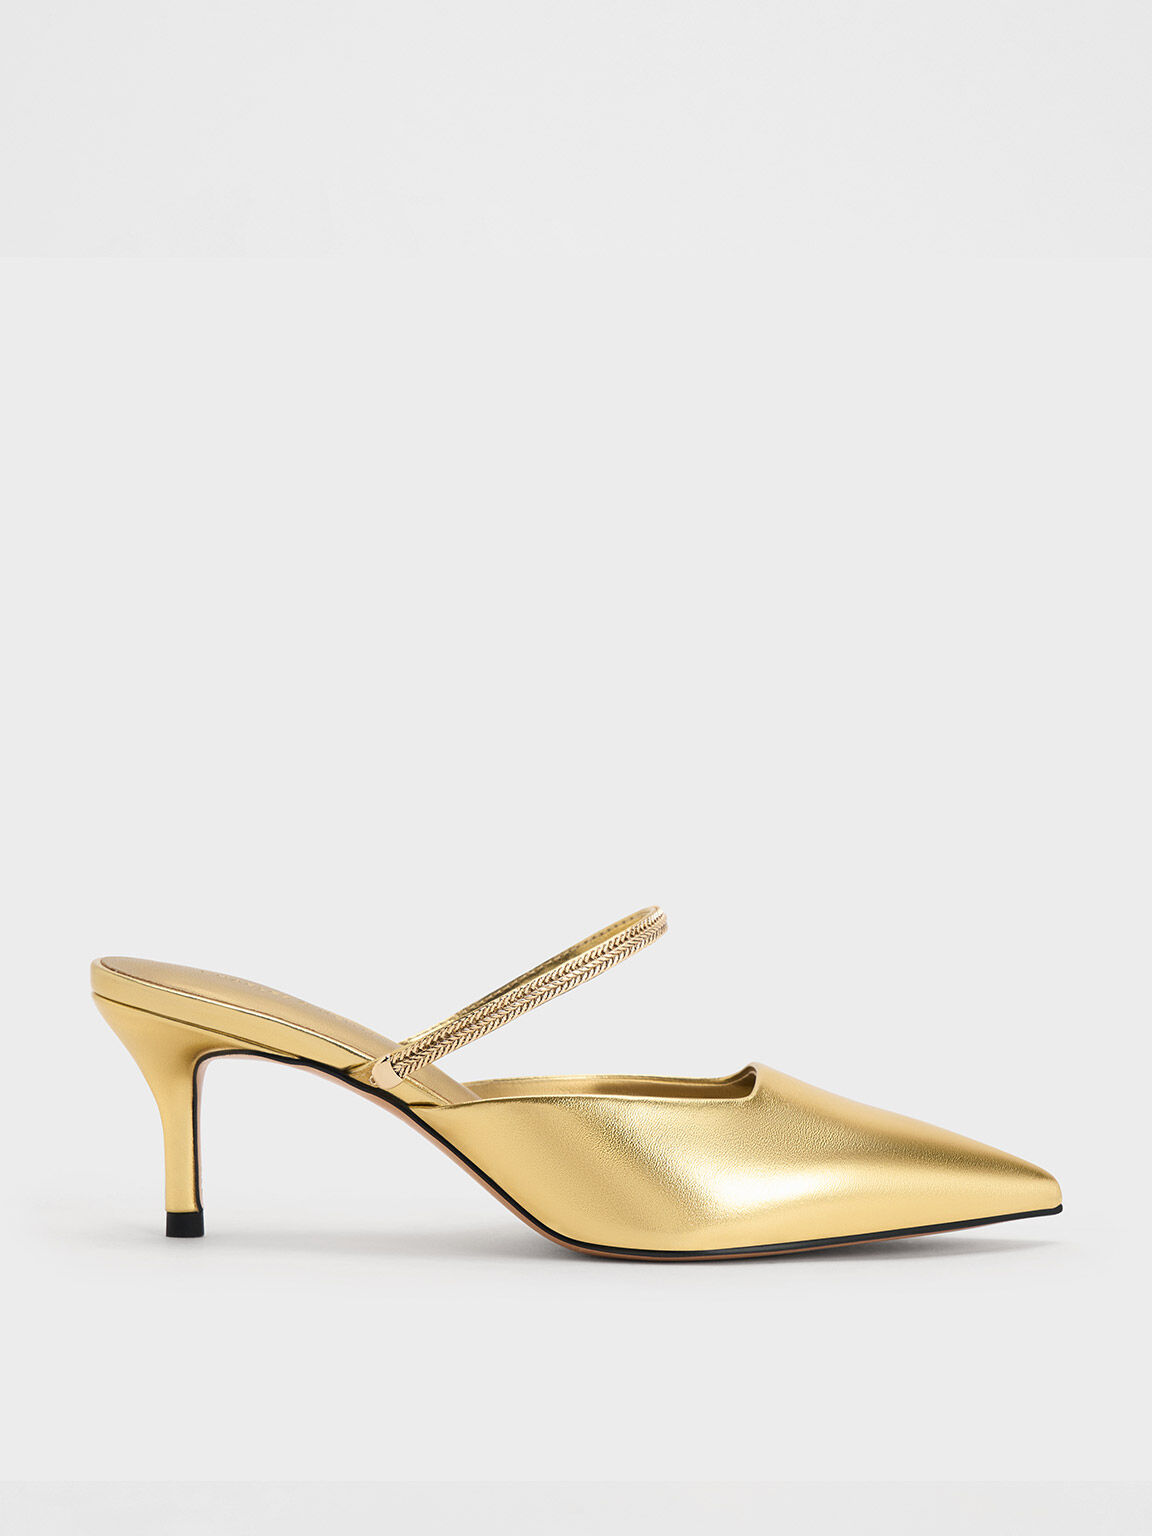 Metallic Braided Strappy Heeled Mules, Gold, hi-res